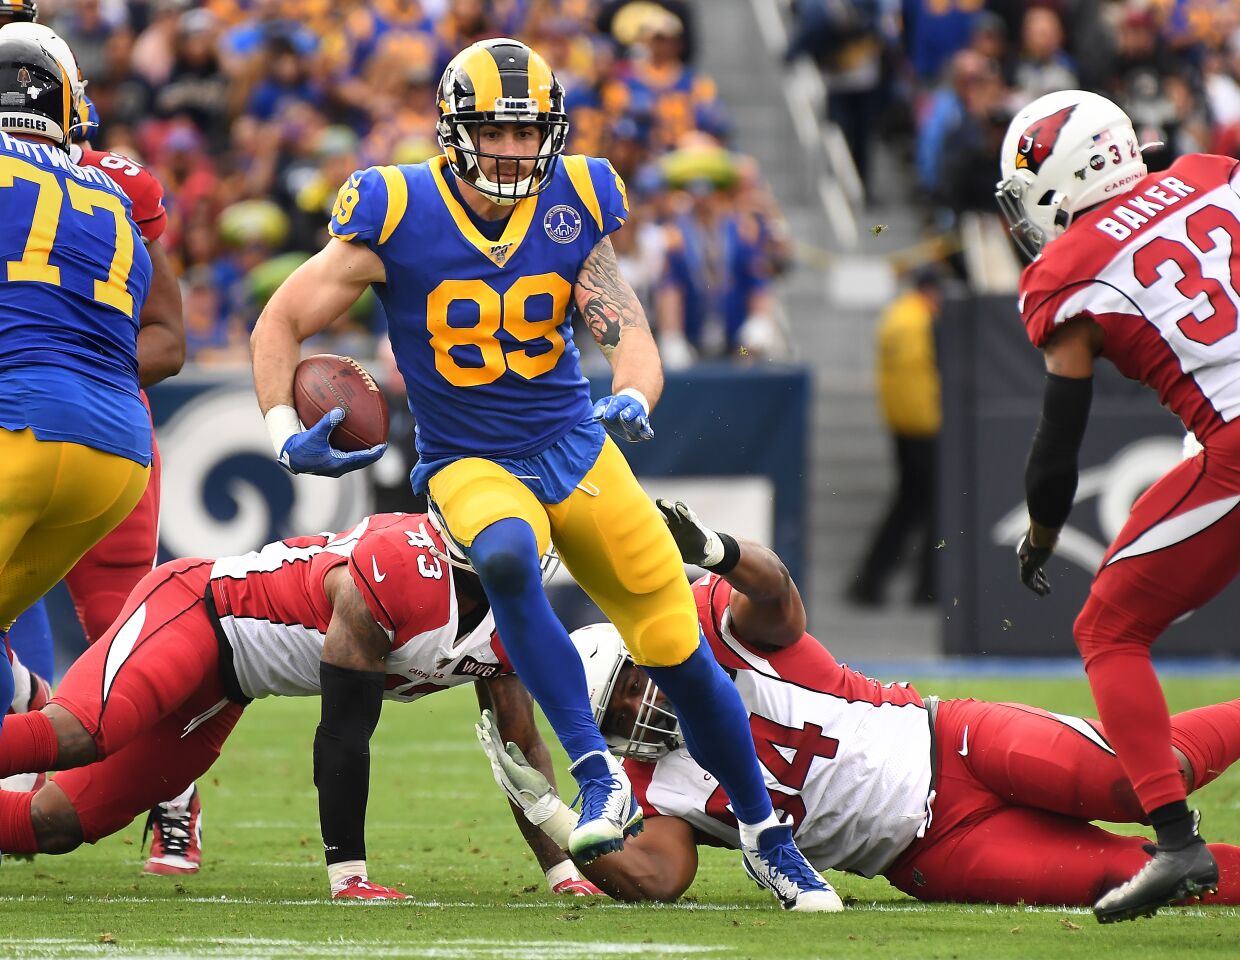 Rams tight end Tyler Higbee runs with the ball against the Arizona Cardinals in the second quarter.